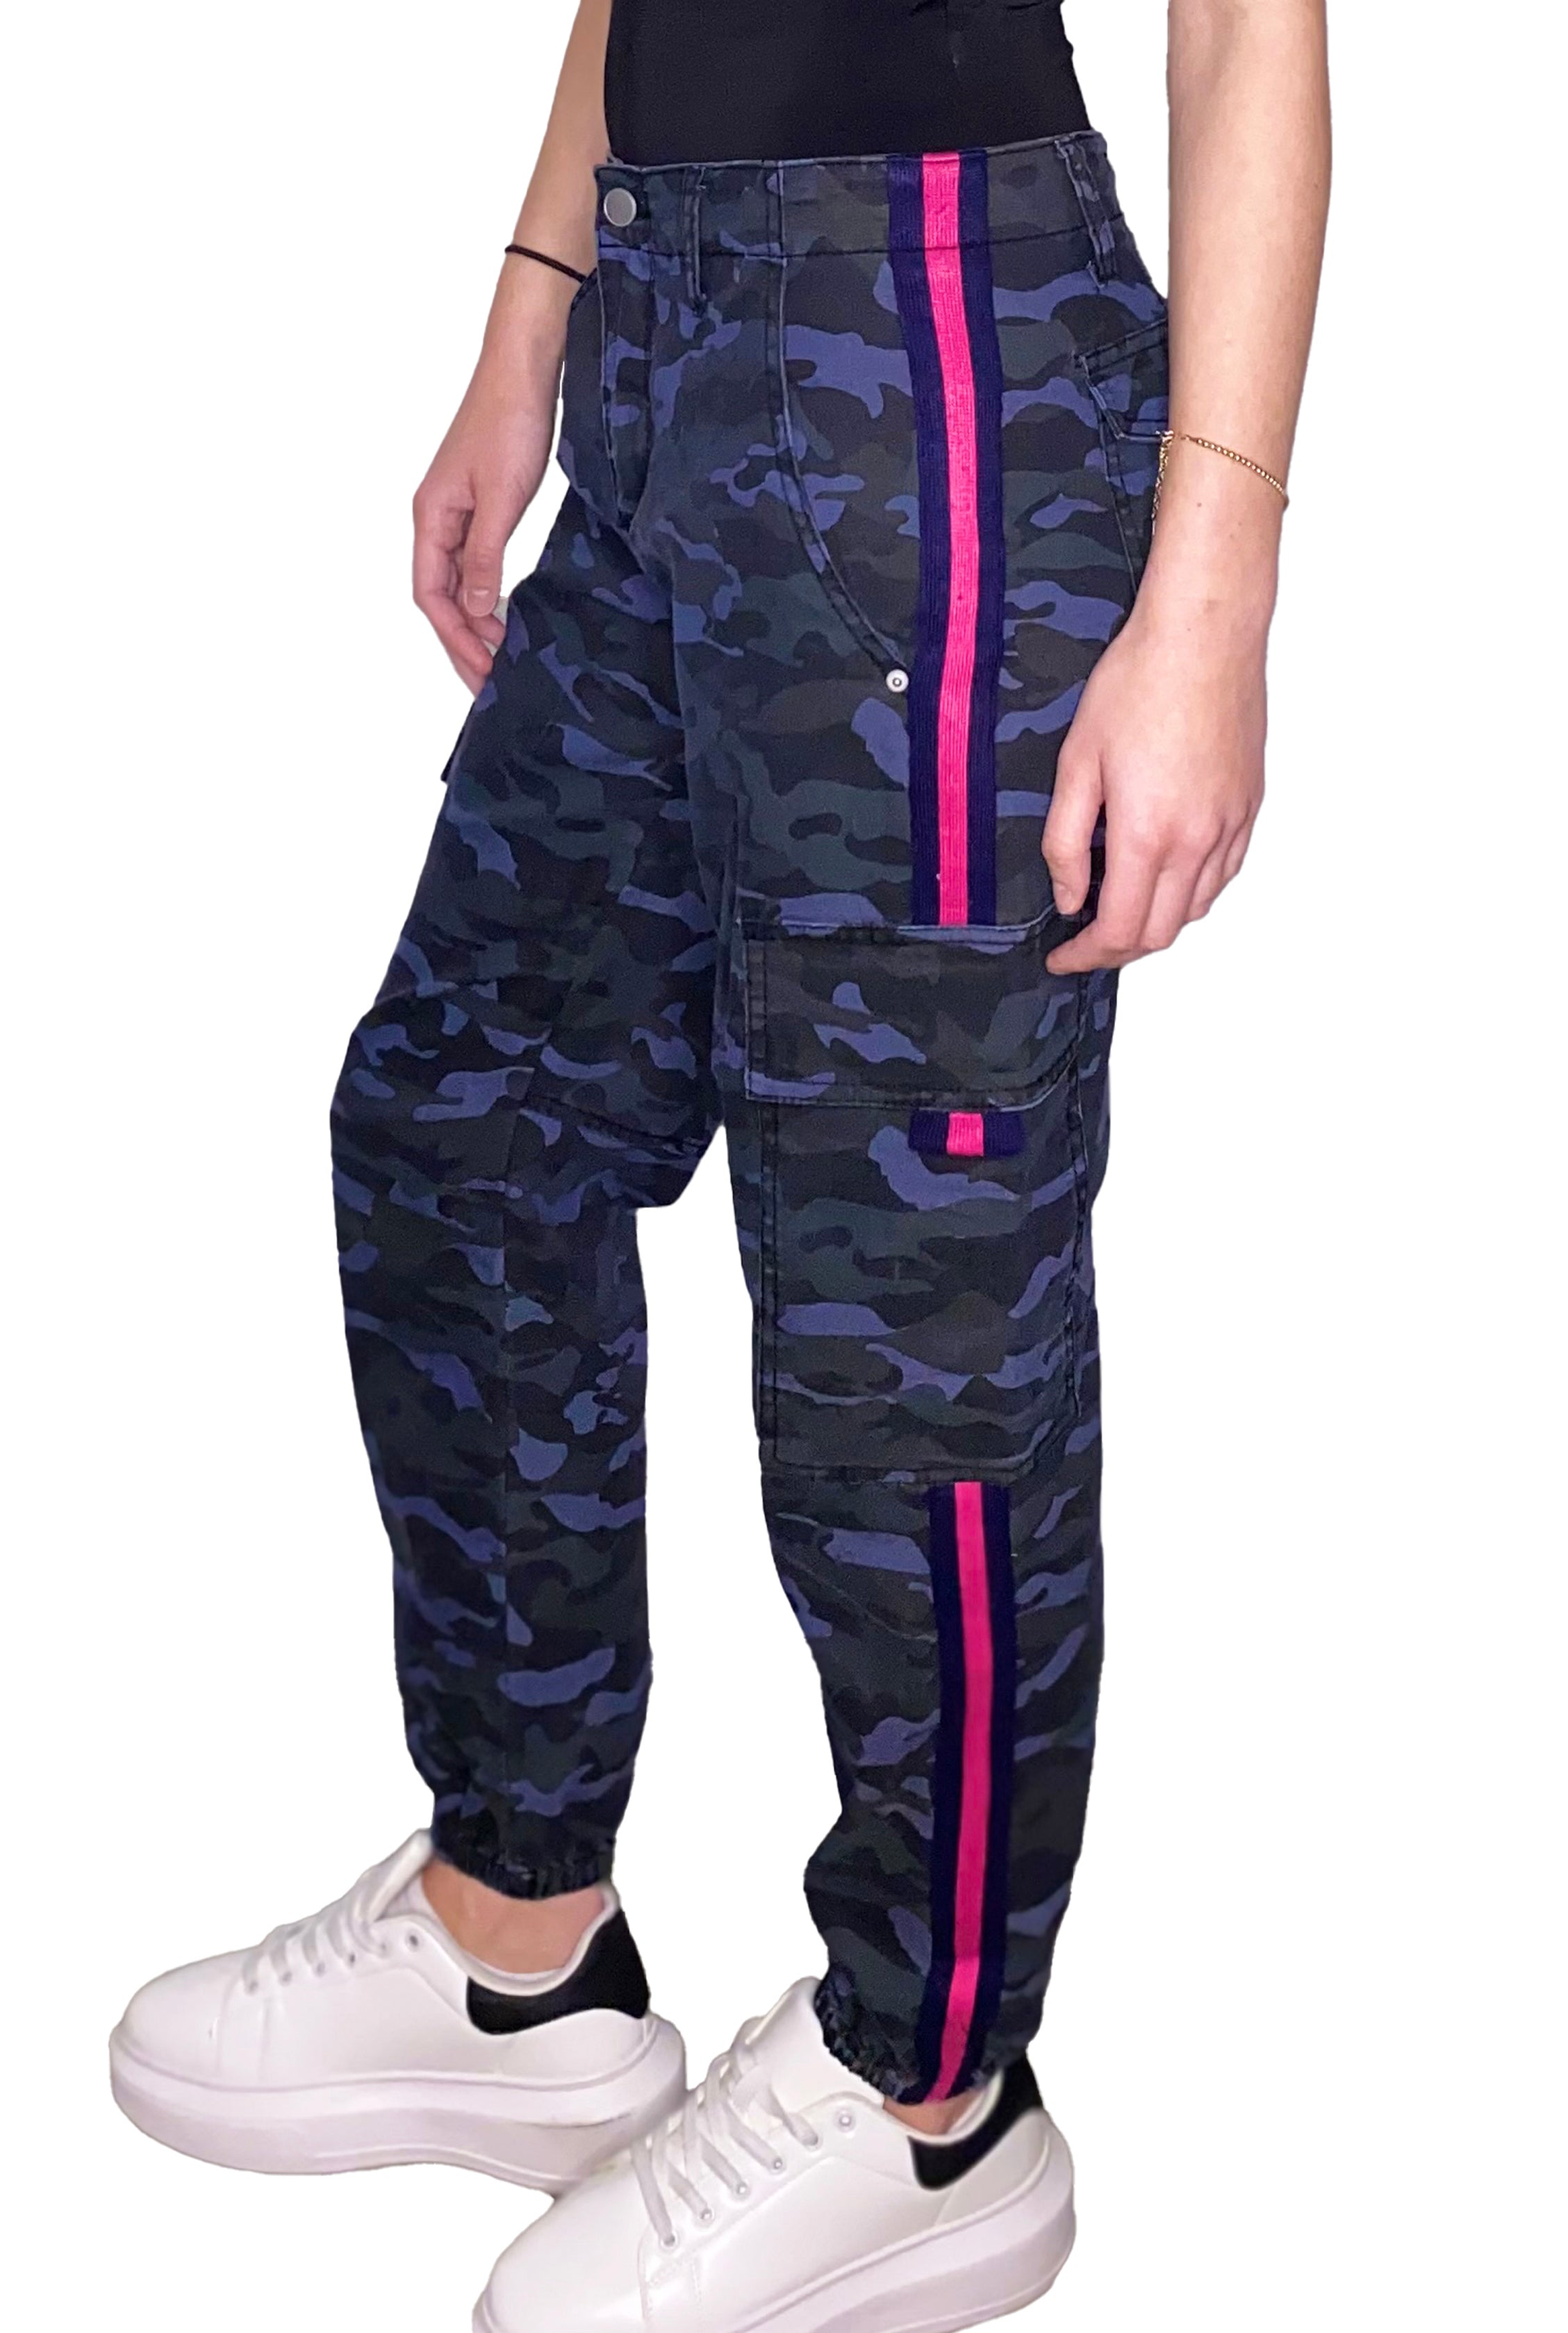 Illegal Cargo in Blue Camo With Pink Stripe